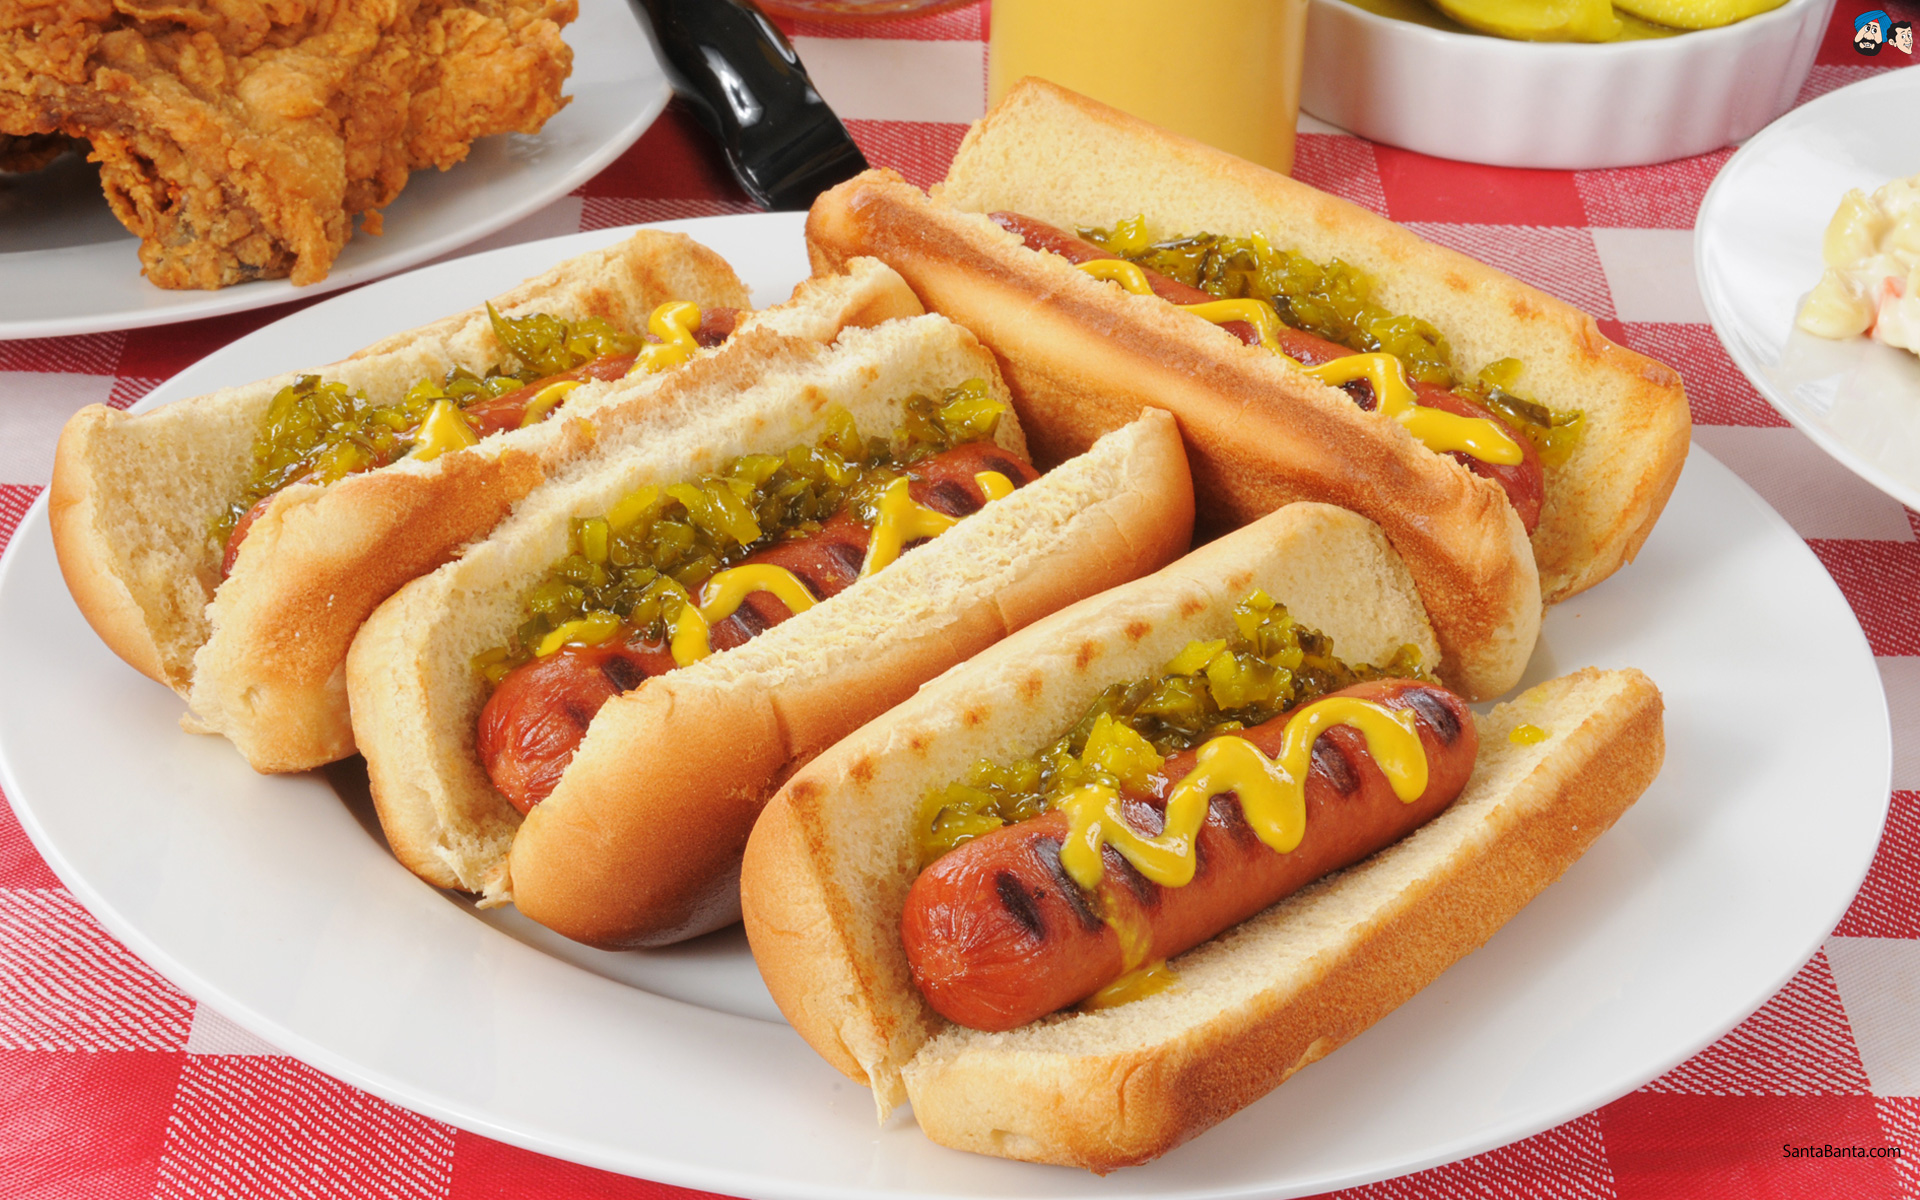 Hot Dog Wallpapers High Quality | Download Free